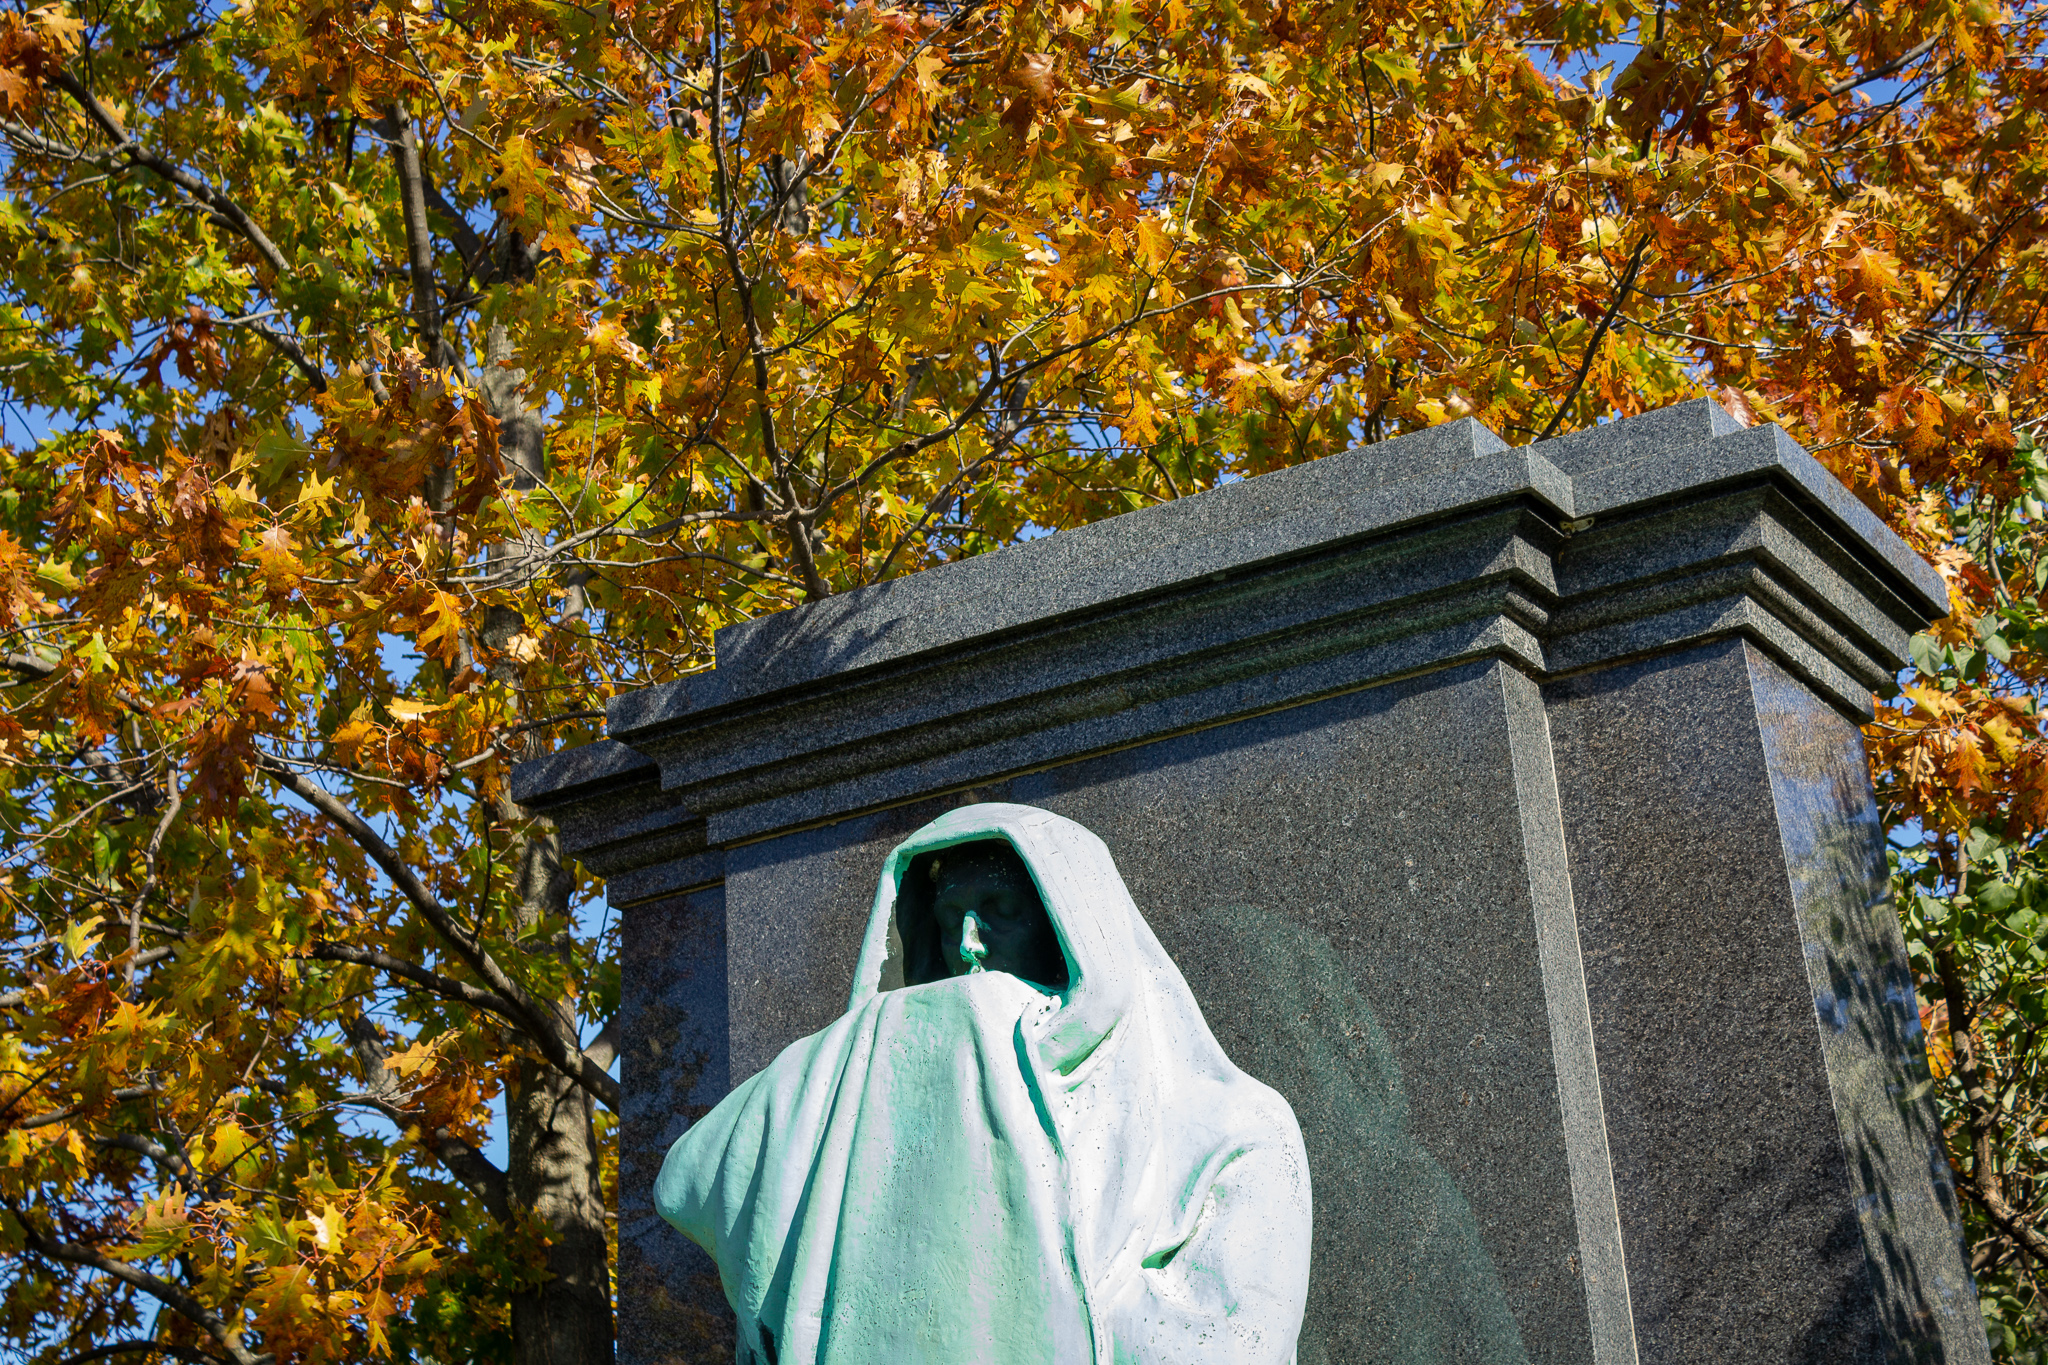 Top of a greened copper statue of a cloaked man against a polished marble monument, in the background a yellow-leafed tree